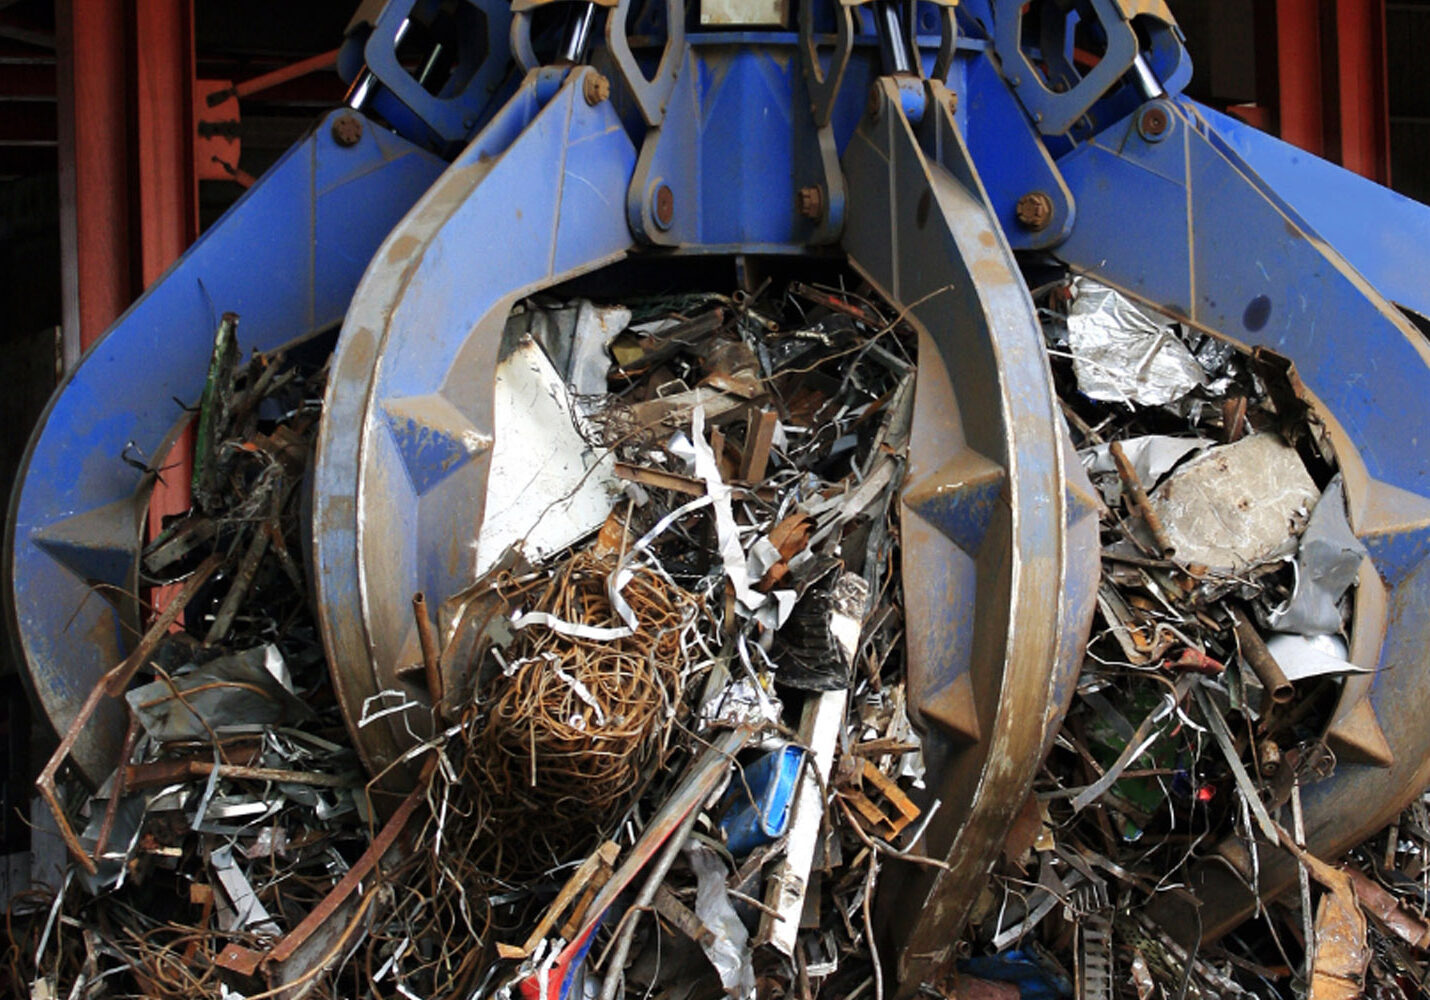 metal recycling for scrap, copper, steel, iron and more